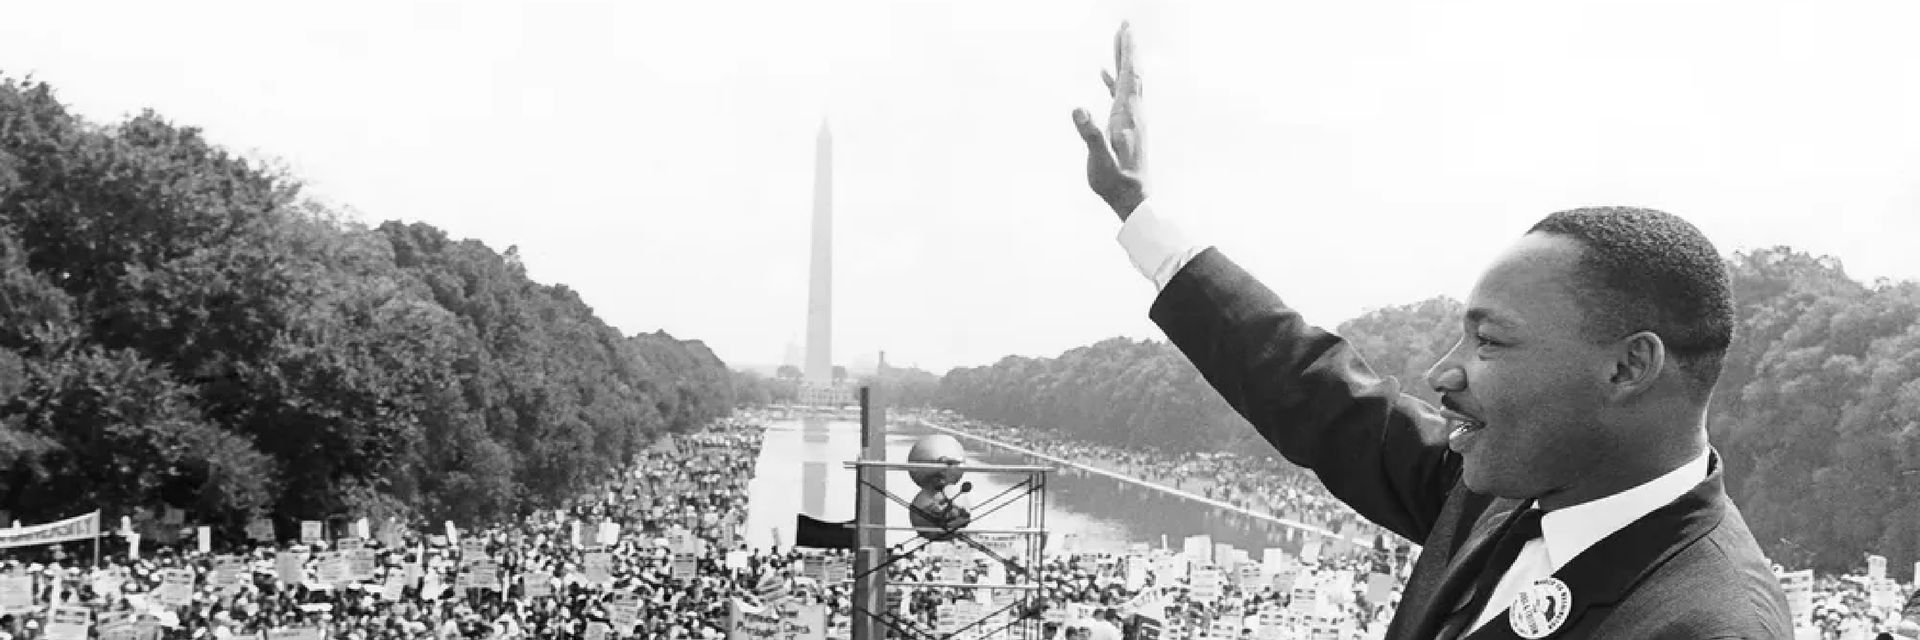 black and white image of Dr. Martin Luther King Jr. waving to the crowd gathered around the reflecting pool in Washington DC